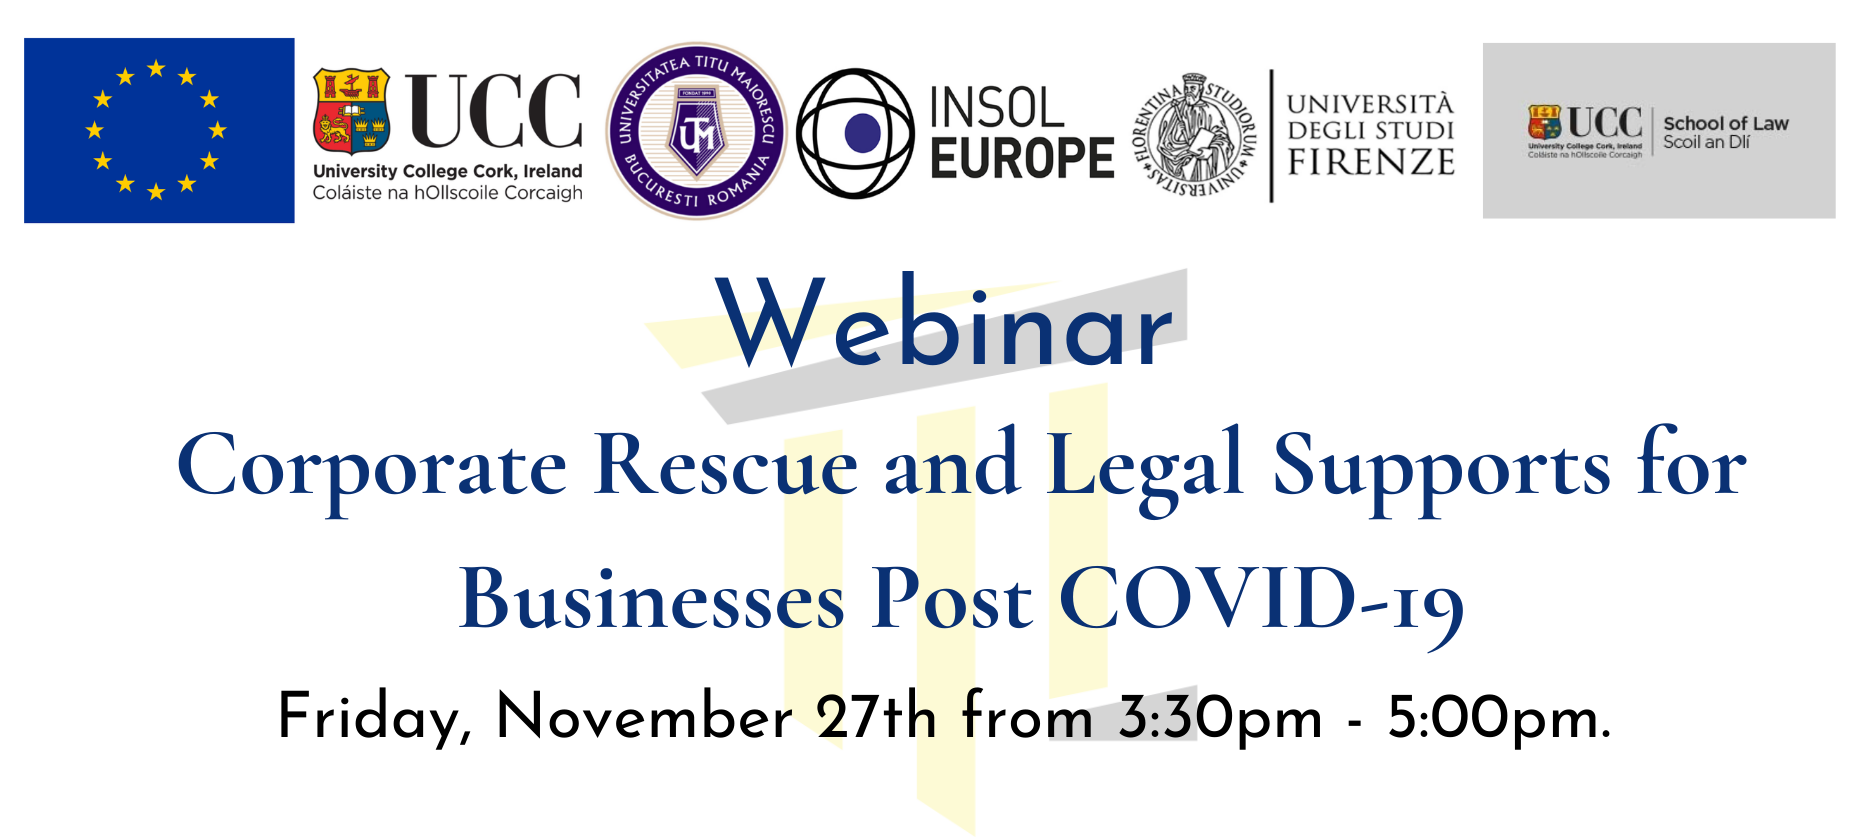 Project Webinar: Corporate Rescue and Legal Supports for Businesses Post COVID-19